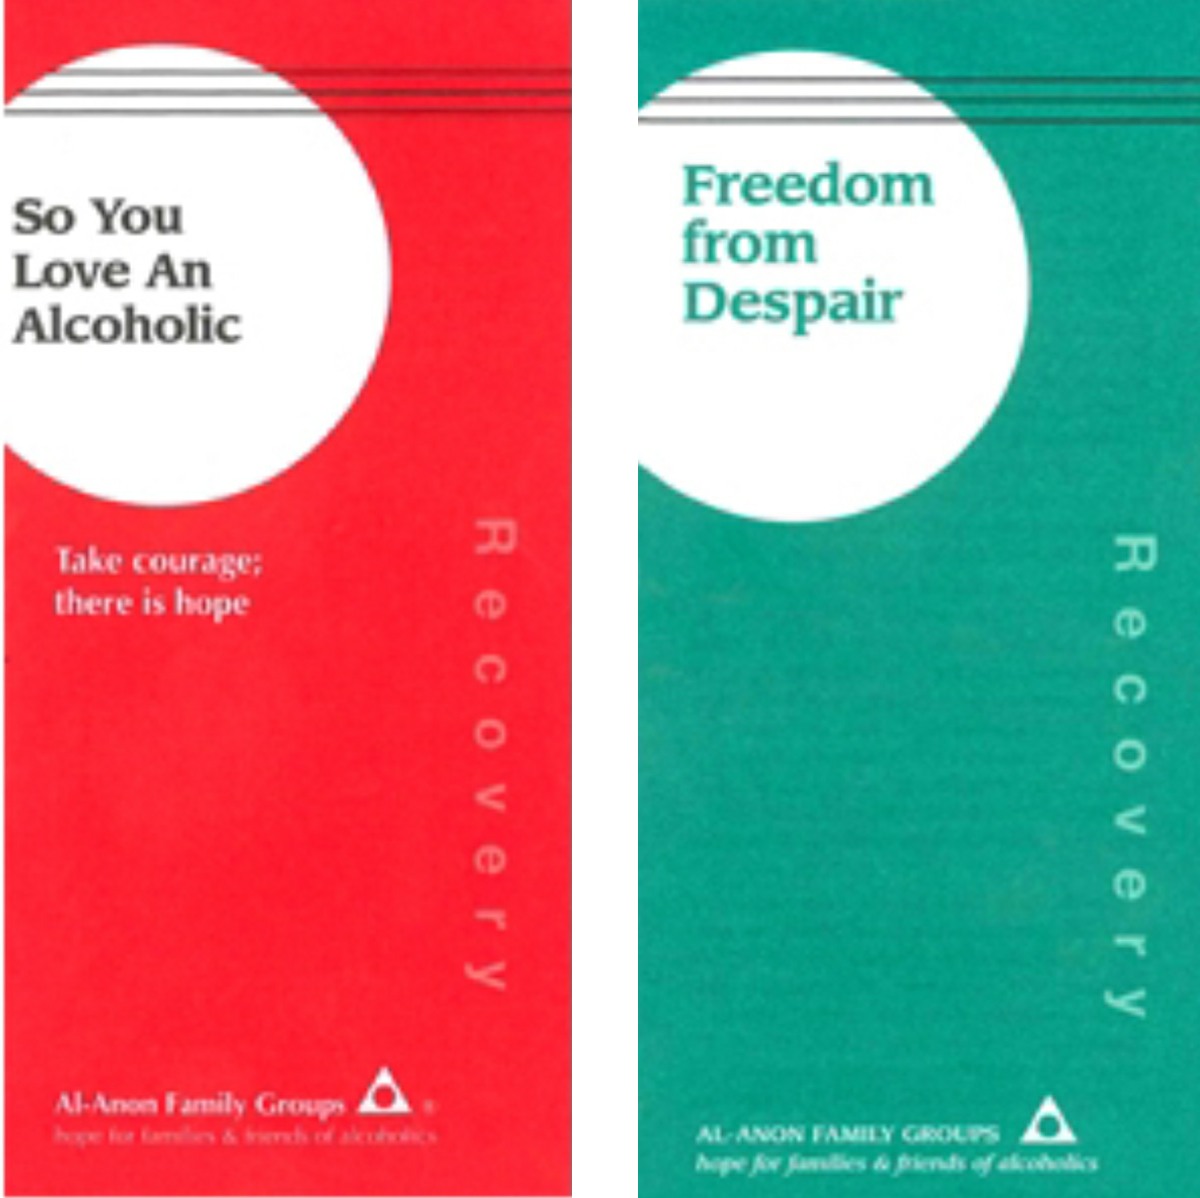 Small Talk Saves Lives: Two of the leaflets produced by Al Anon.